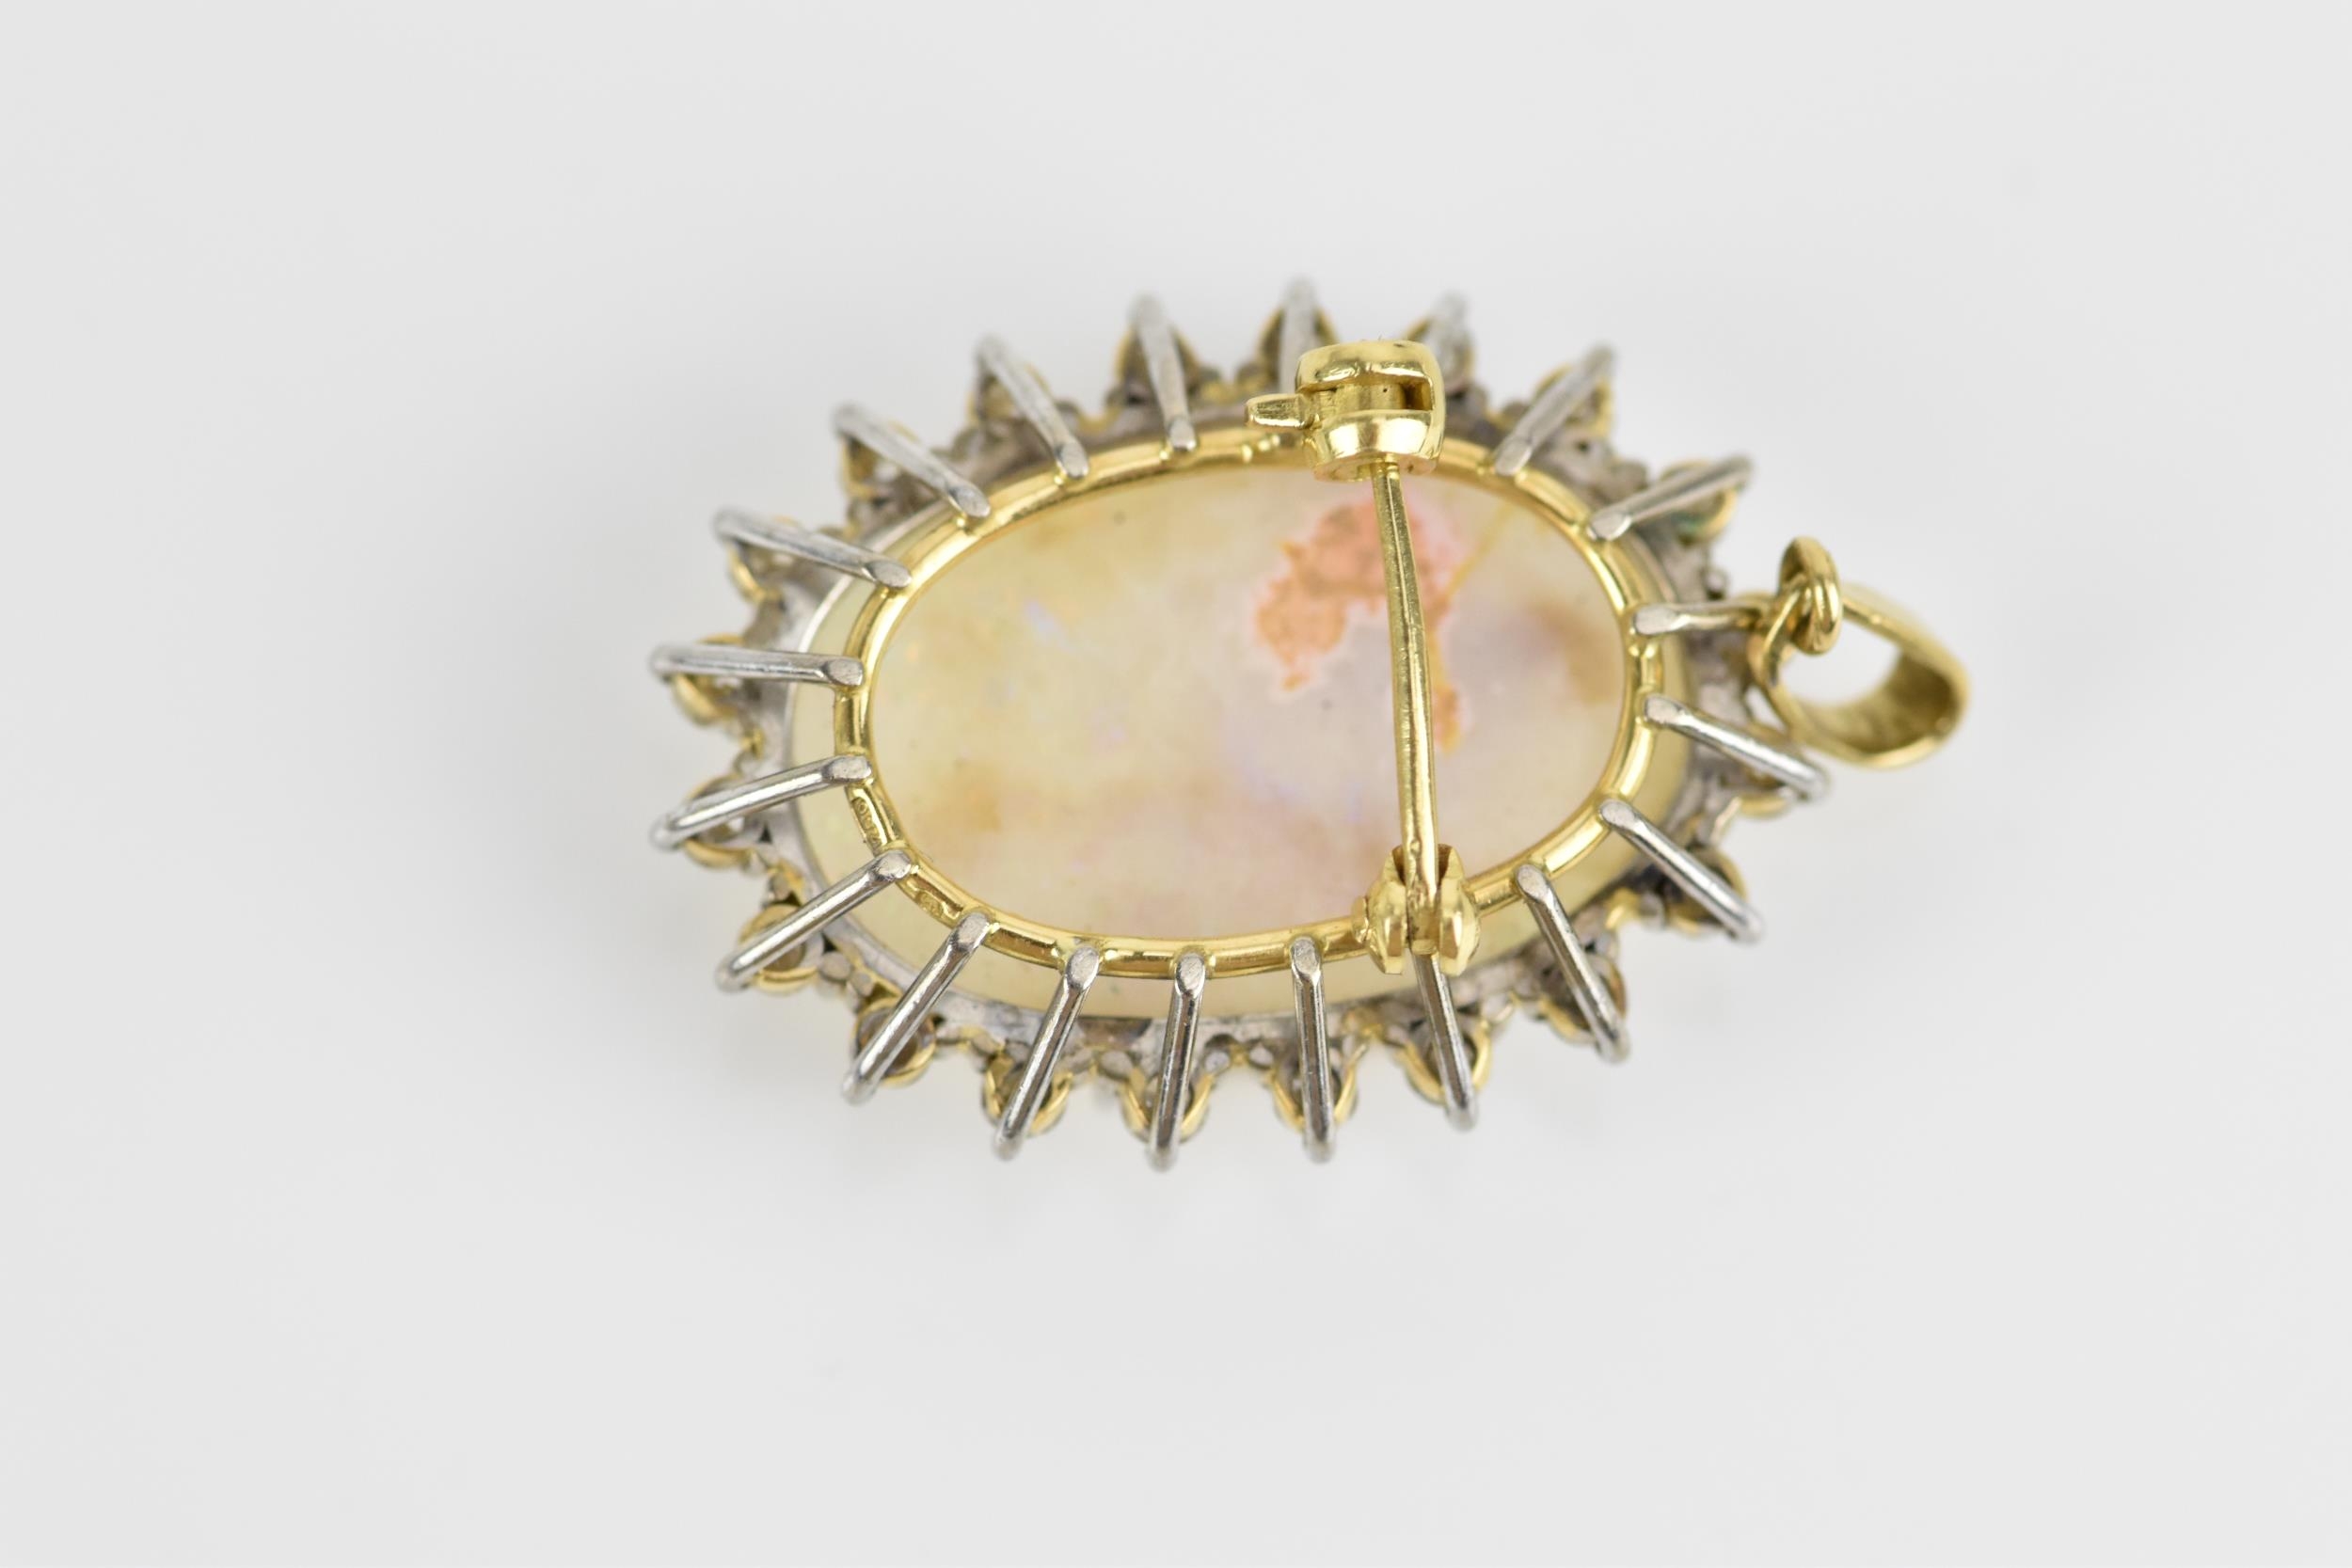 An 18ct yellow gold, white metal, diamond and white opal pendant/brooch, of oval design with central - Image 5 of 6